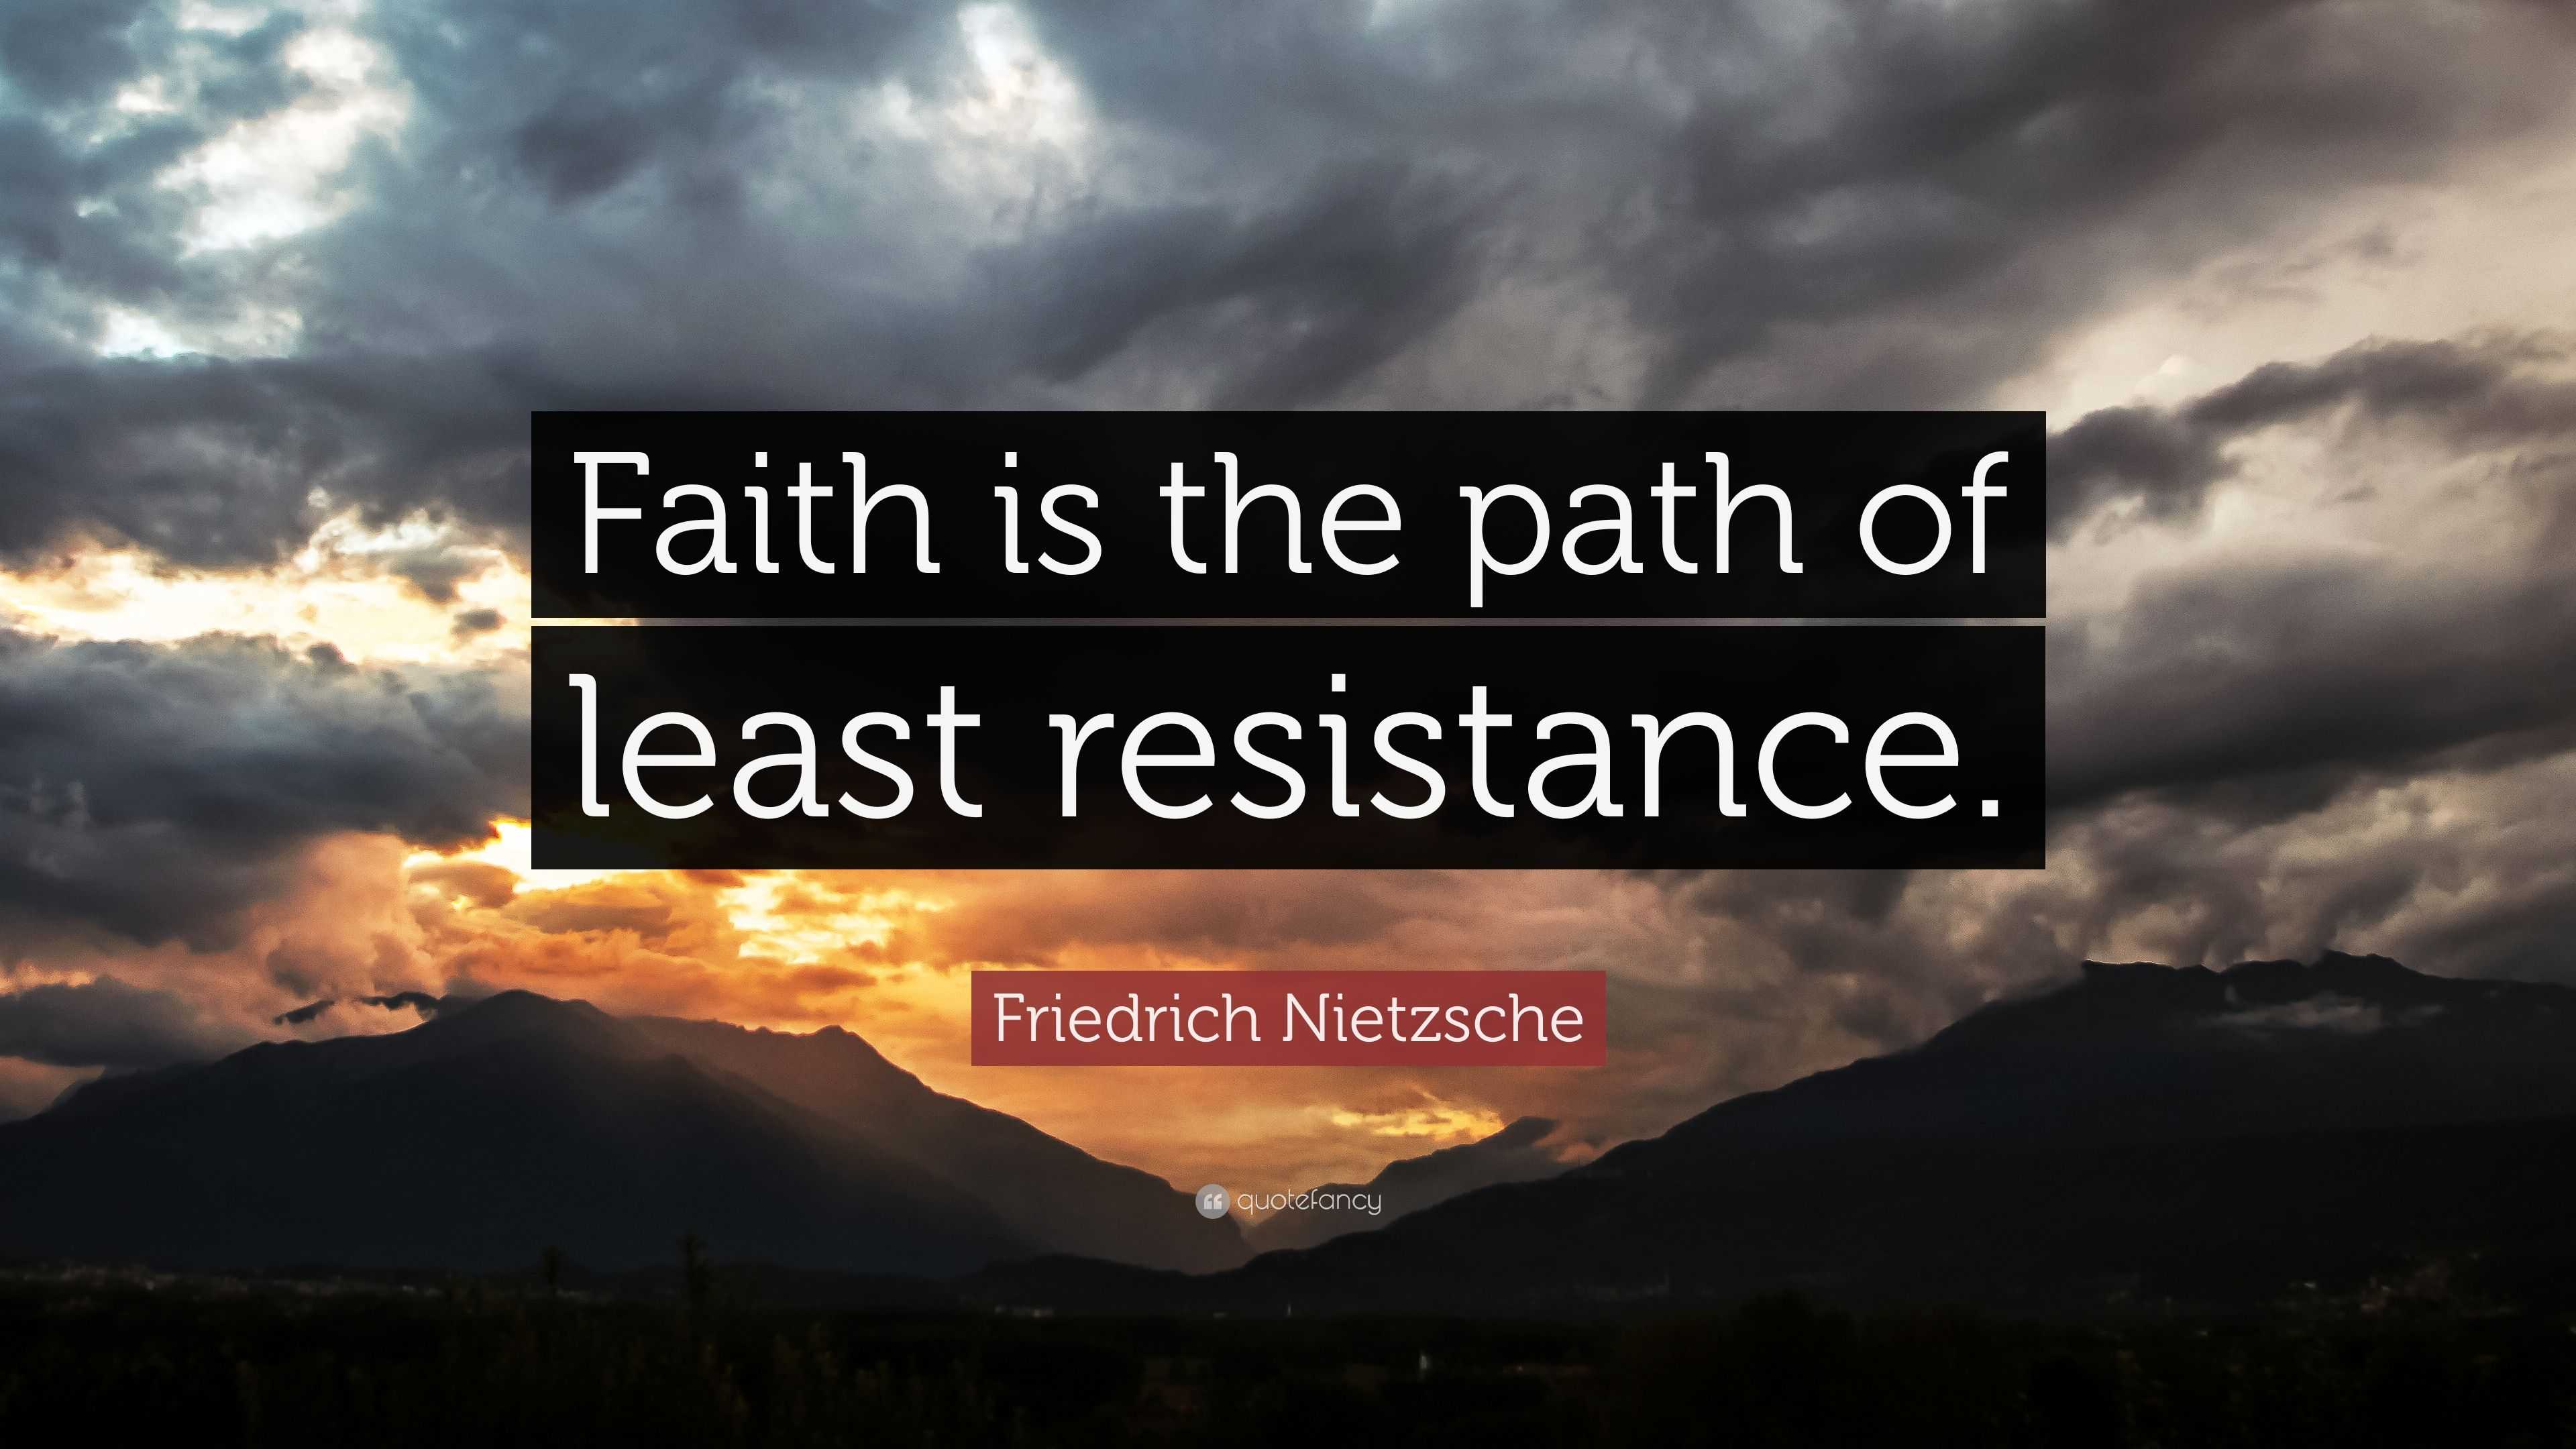 Friedrich Nietzsche Quote: "Faith is the path of least resistance." (7 wallpapers) - Quotefancy